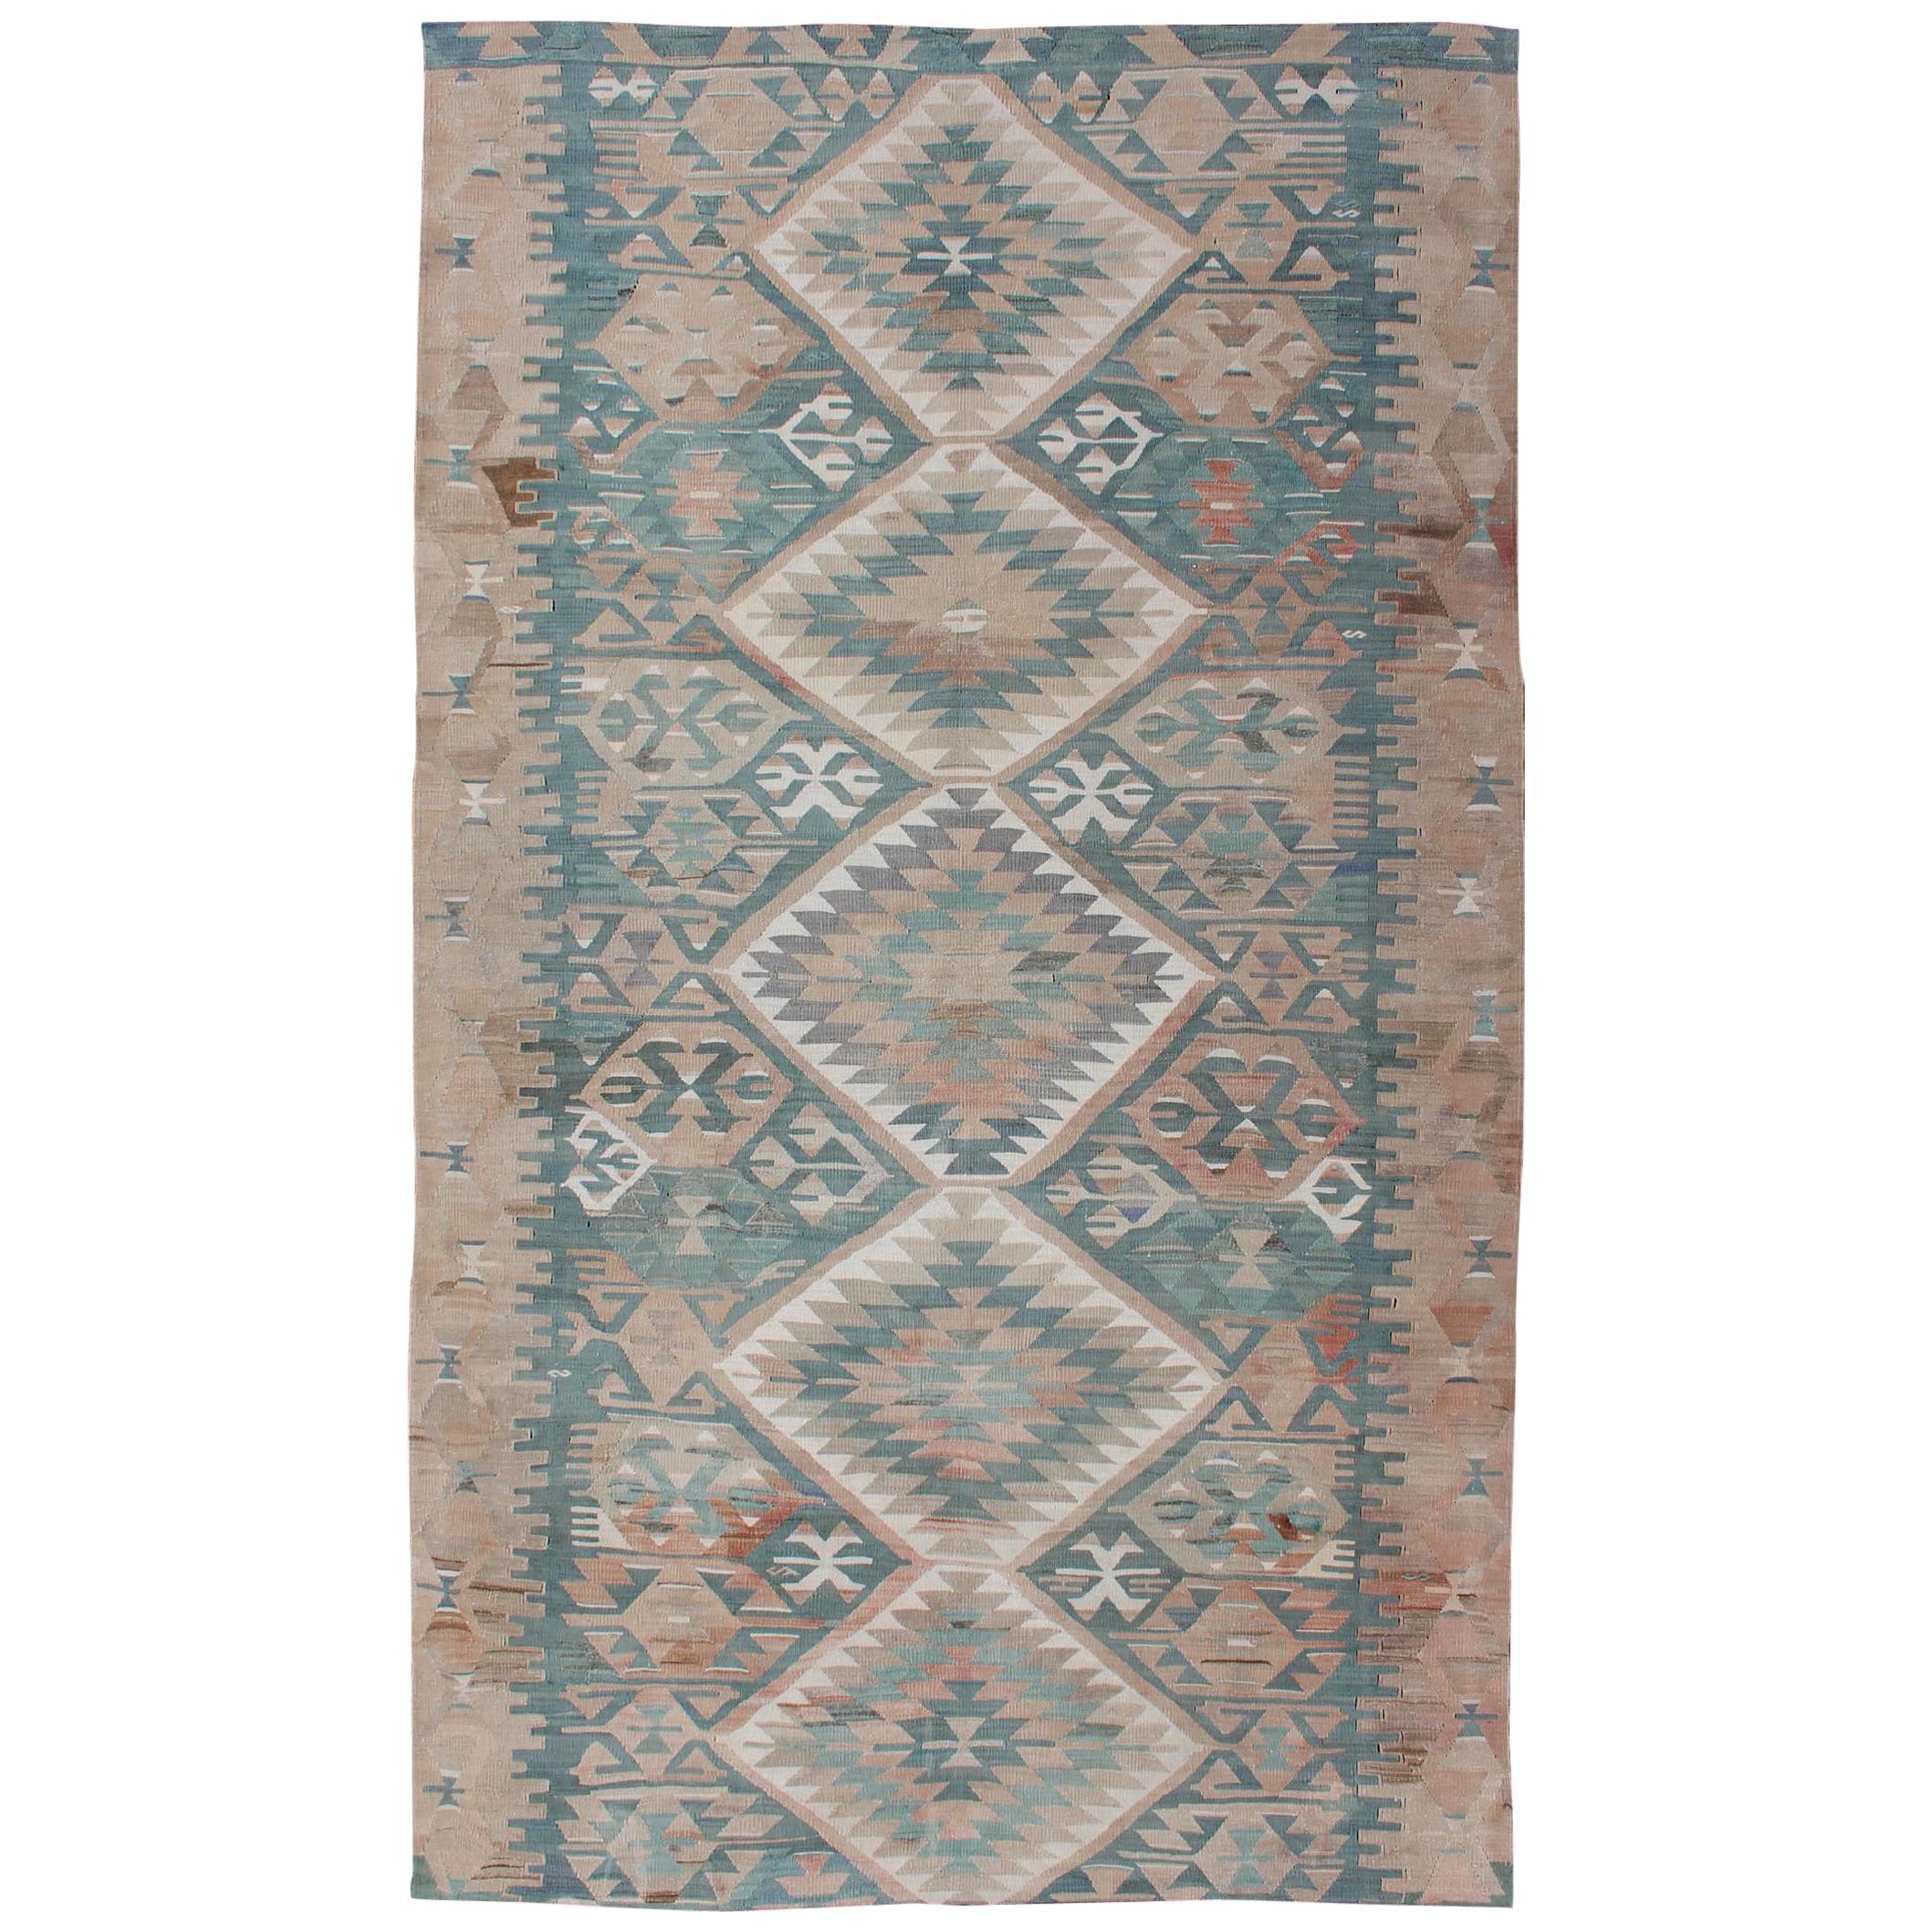 Geometric Design Vintage Turkish Tribal Flat-Weave Rug in Teal and Neutrals For Sale